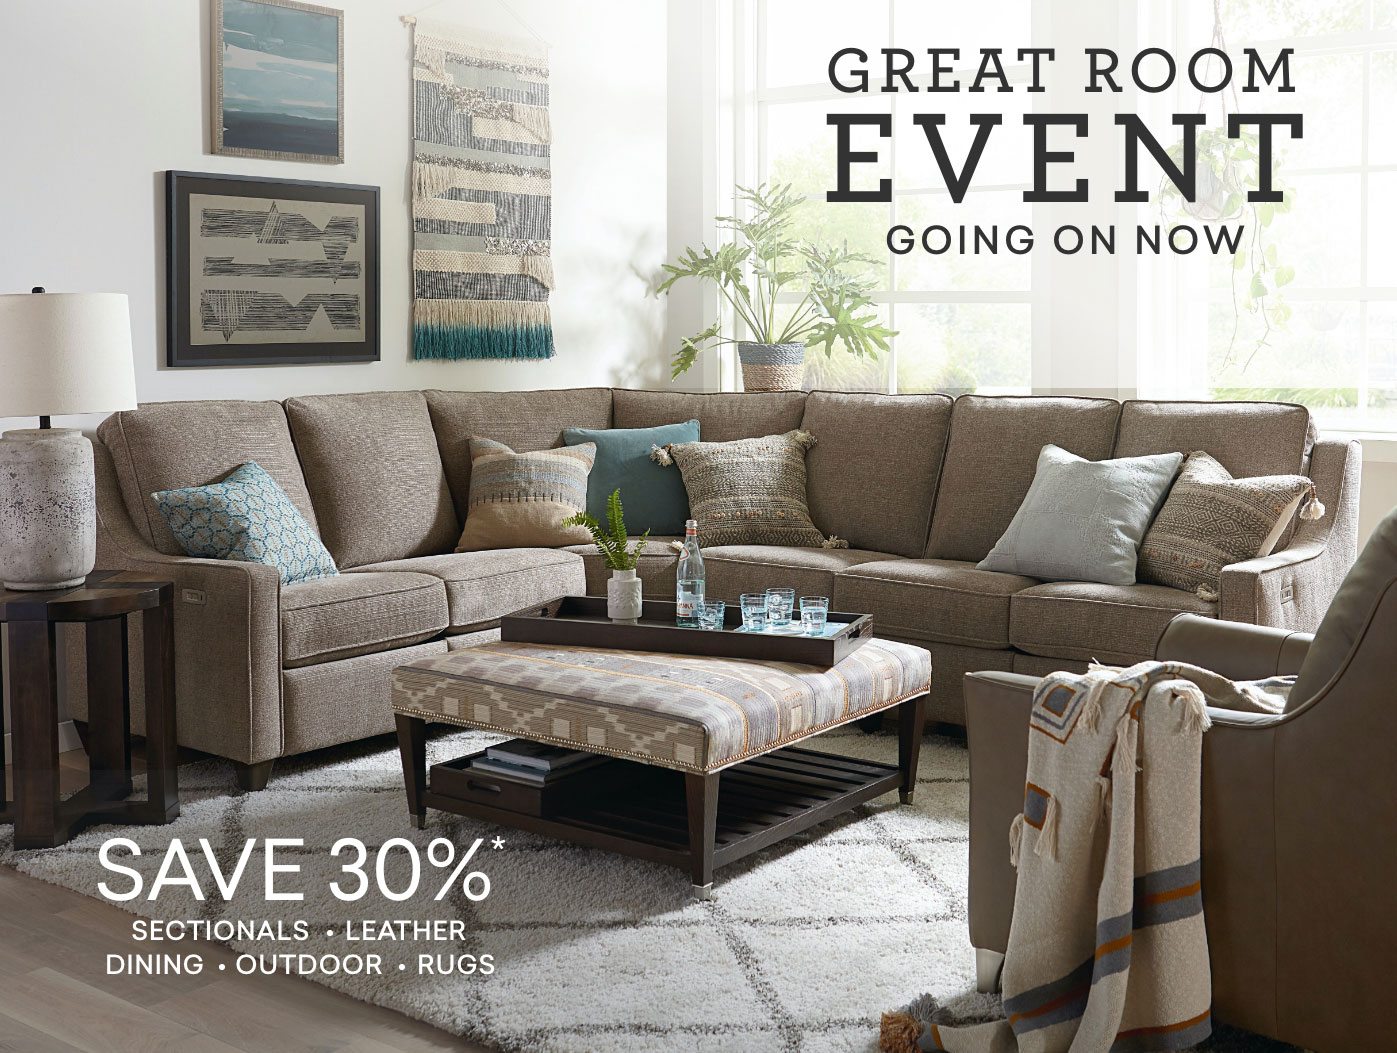 Great Room Event. Going on now. 30% off sectionals, leather, dining, outdoor and rugs. Shop now.